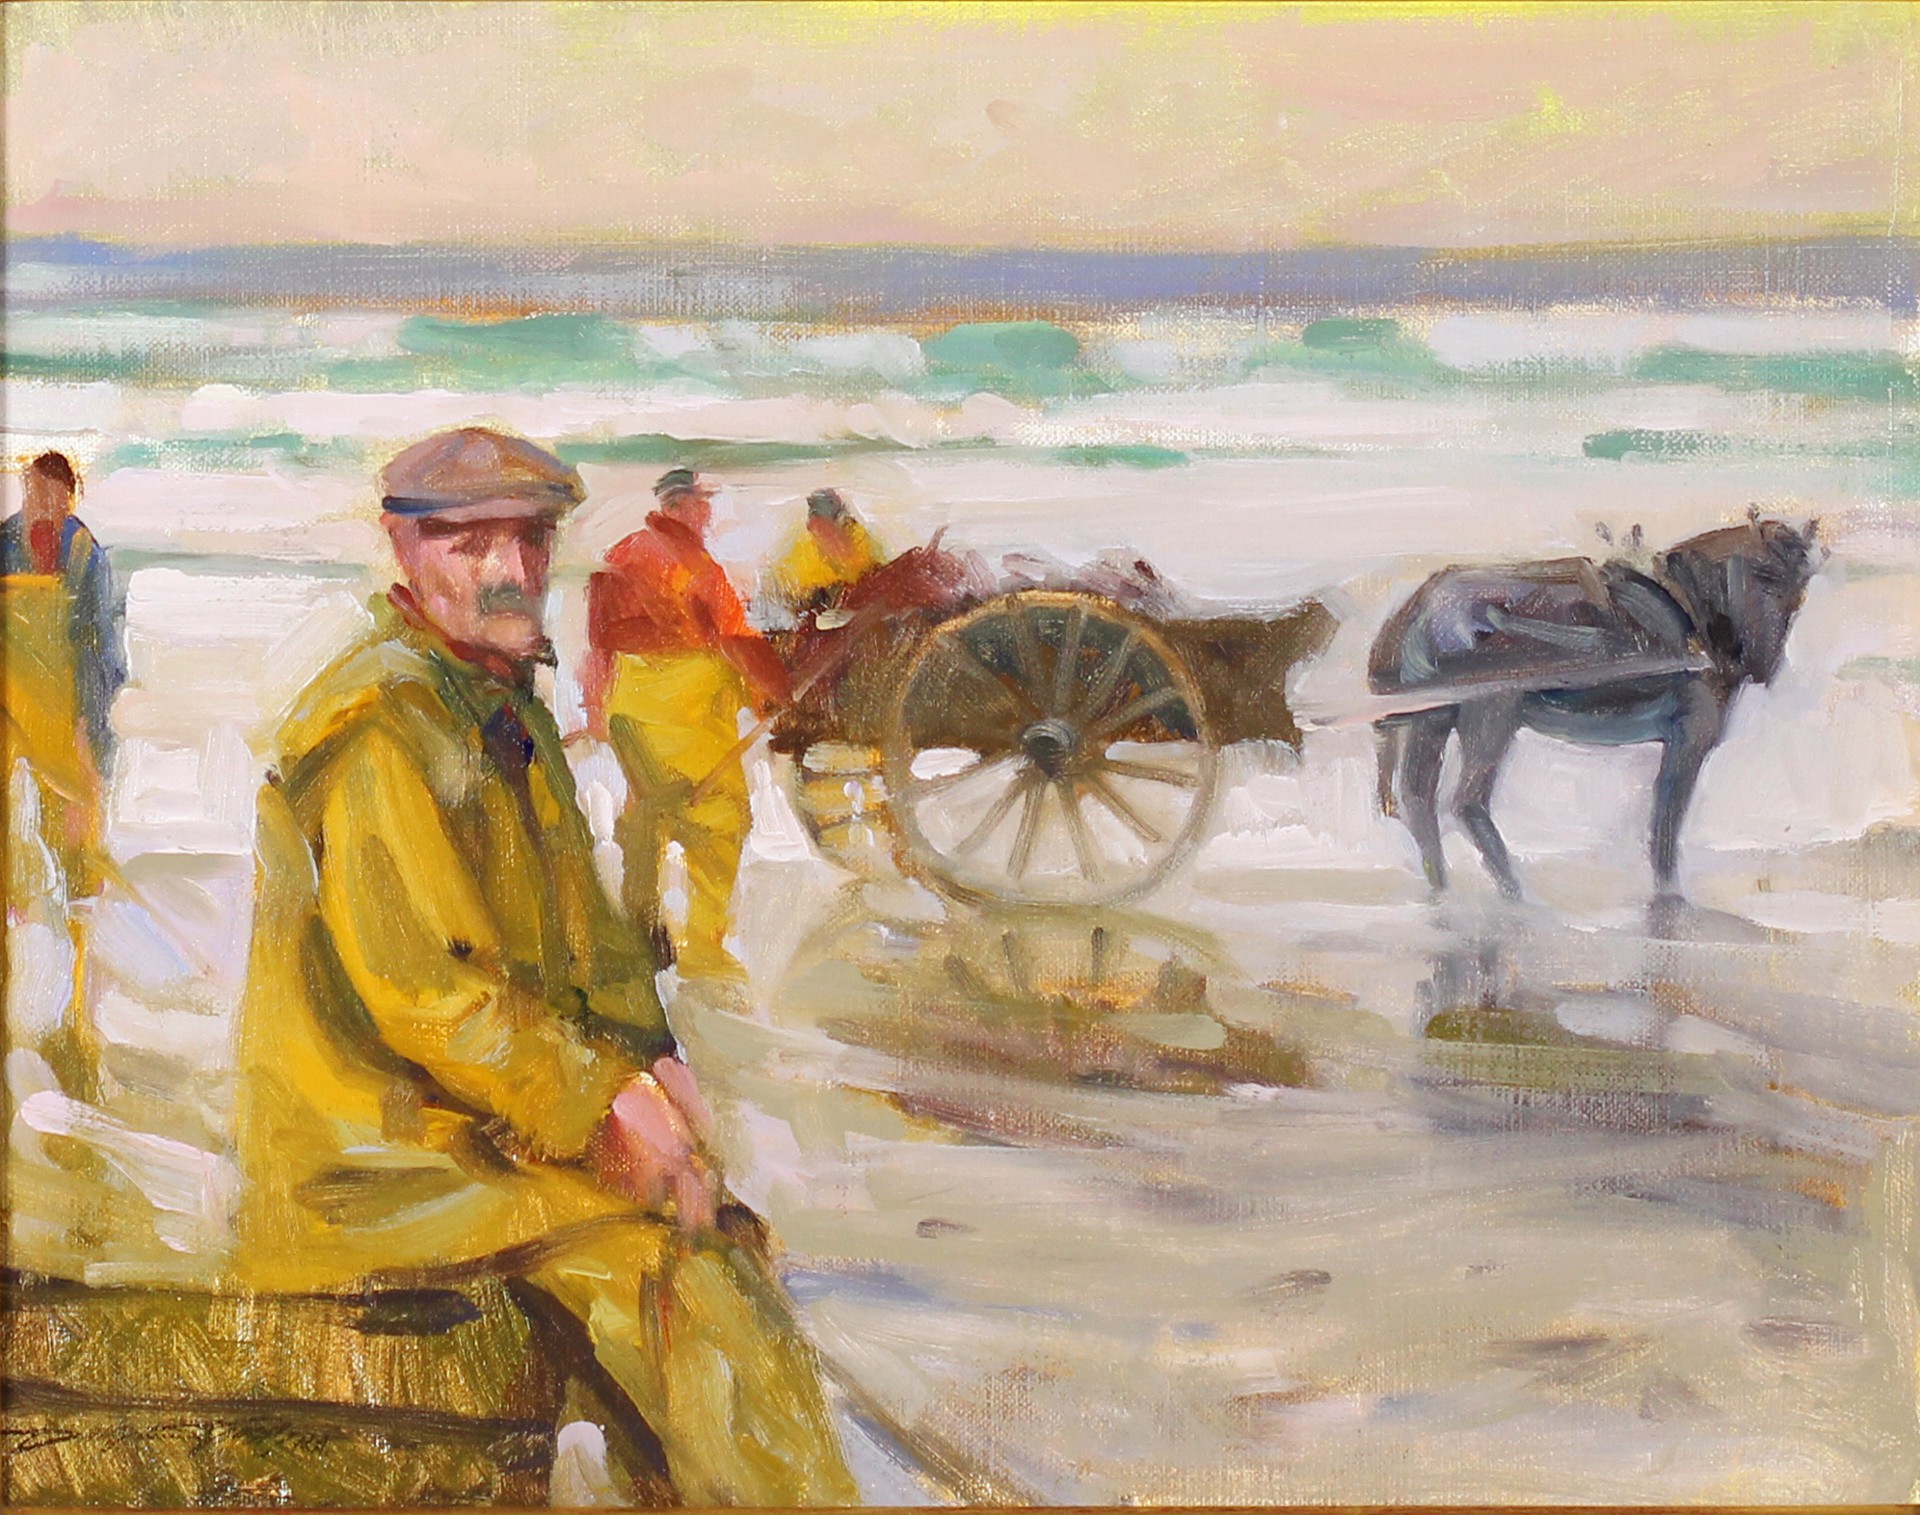 At the Beach by Don Stone